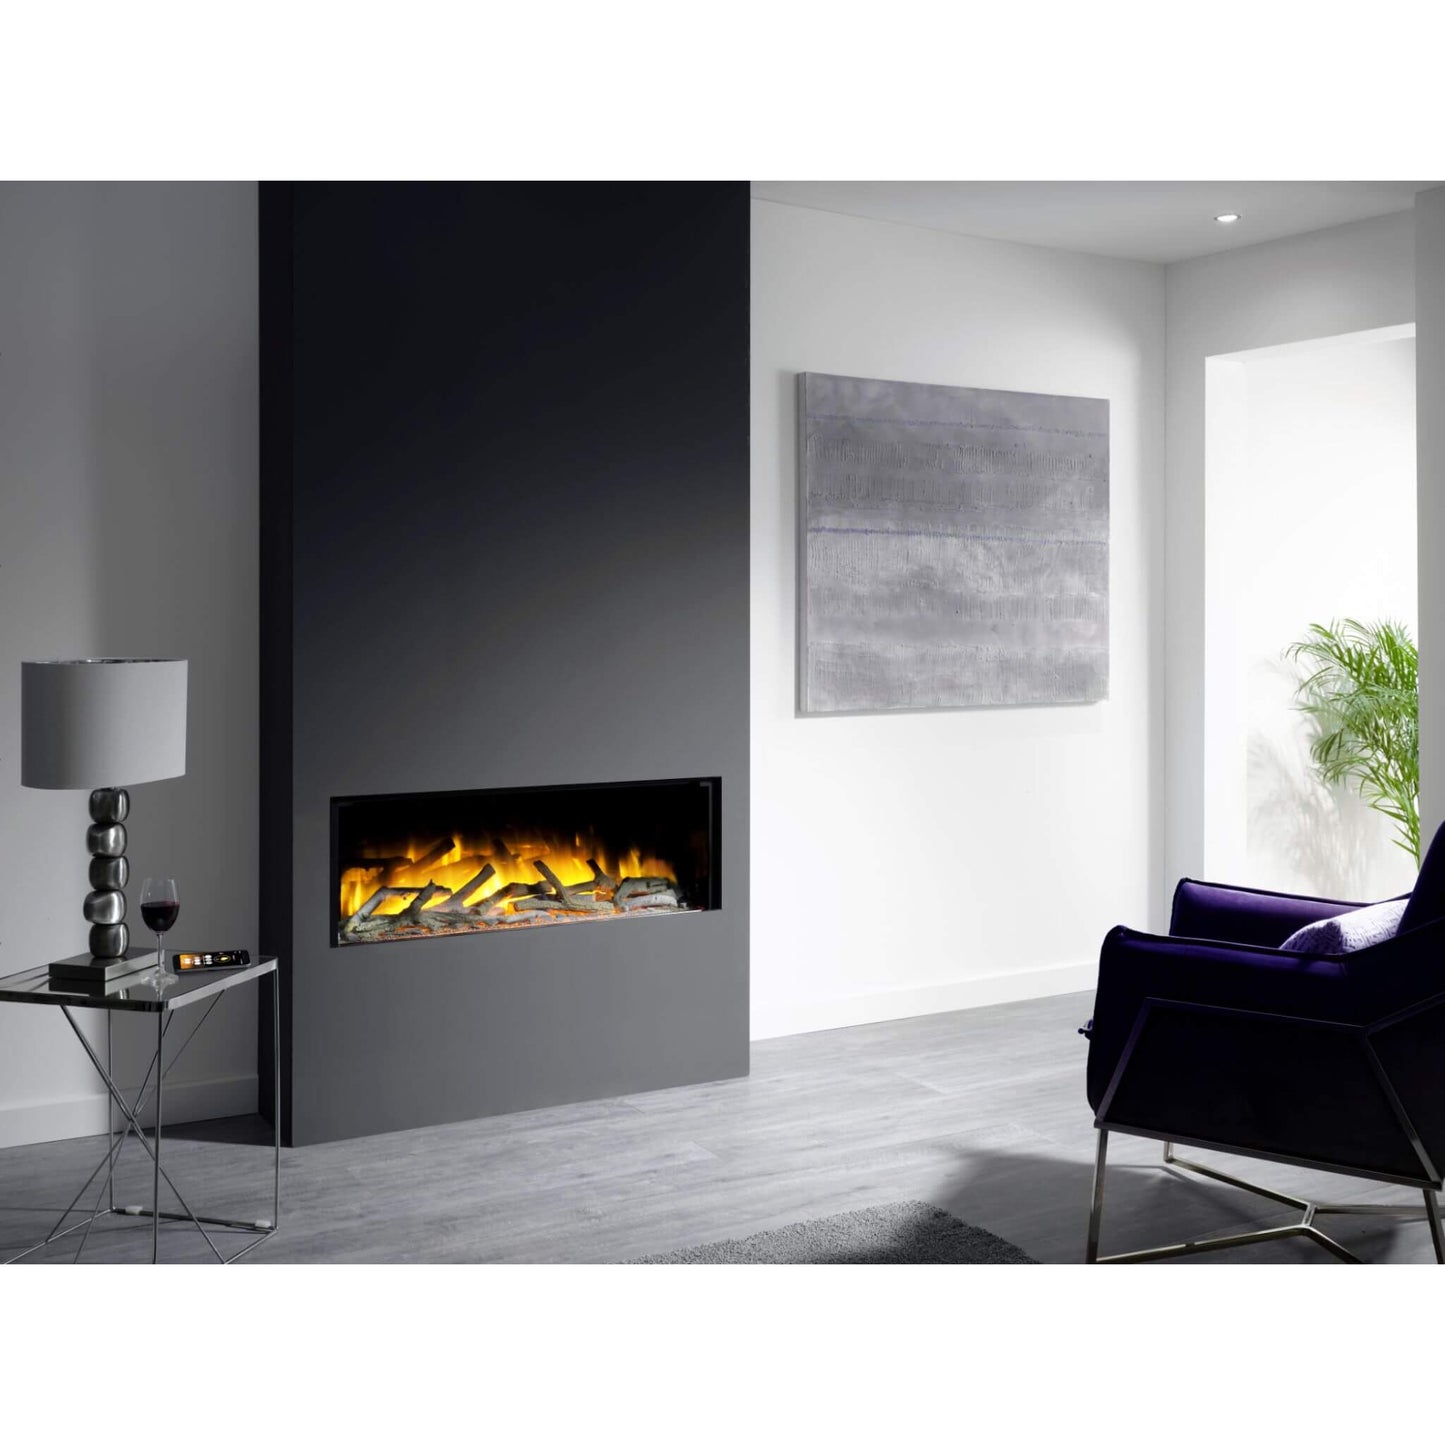 Flamerite Glazer 1000 LED Inset Wall Mounted Electric Fires